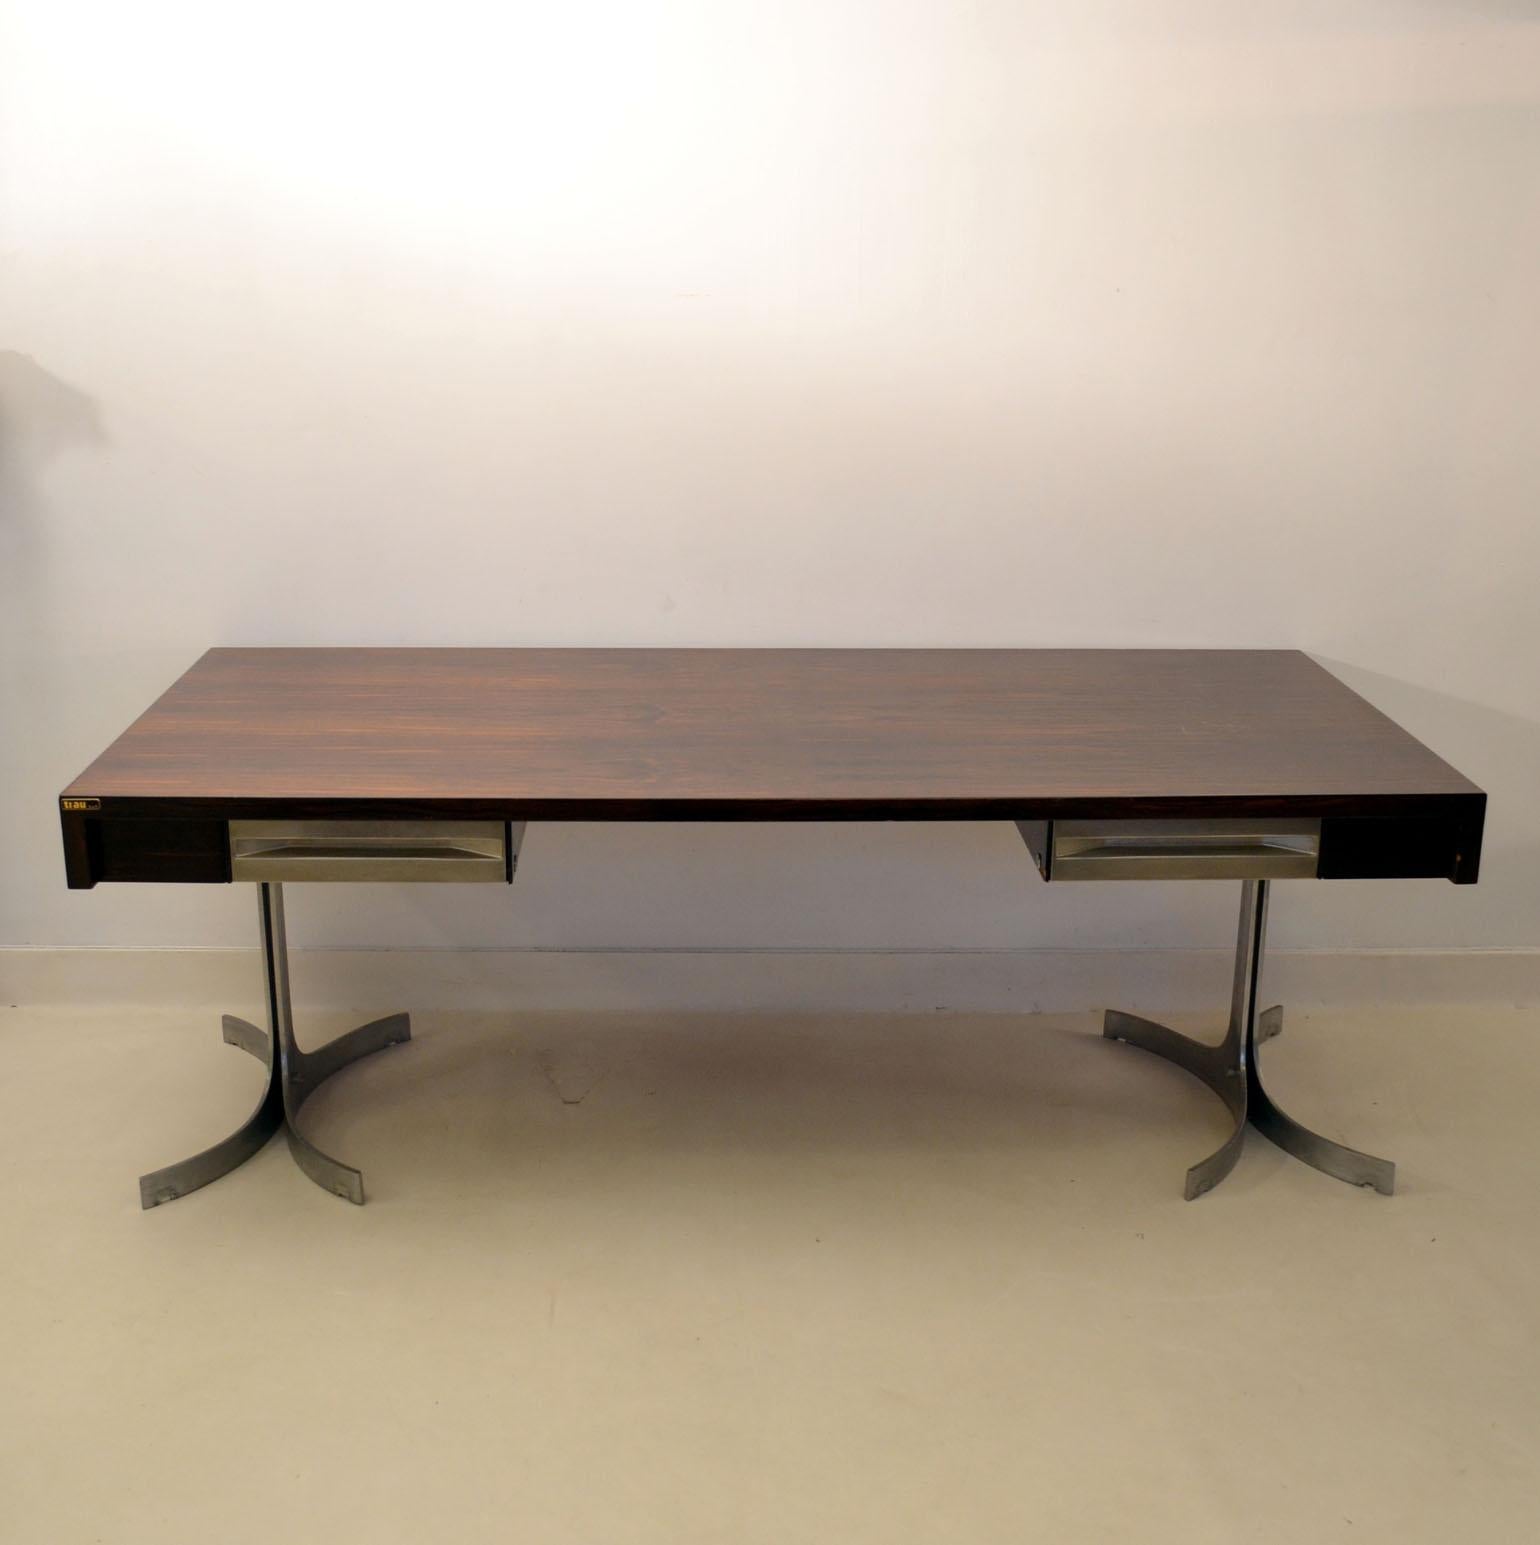 Aluminum Large Executive Desk by Trau, Italian 1960s, Wooden Top on Curved Metal Legs